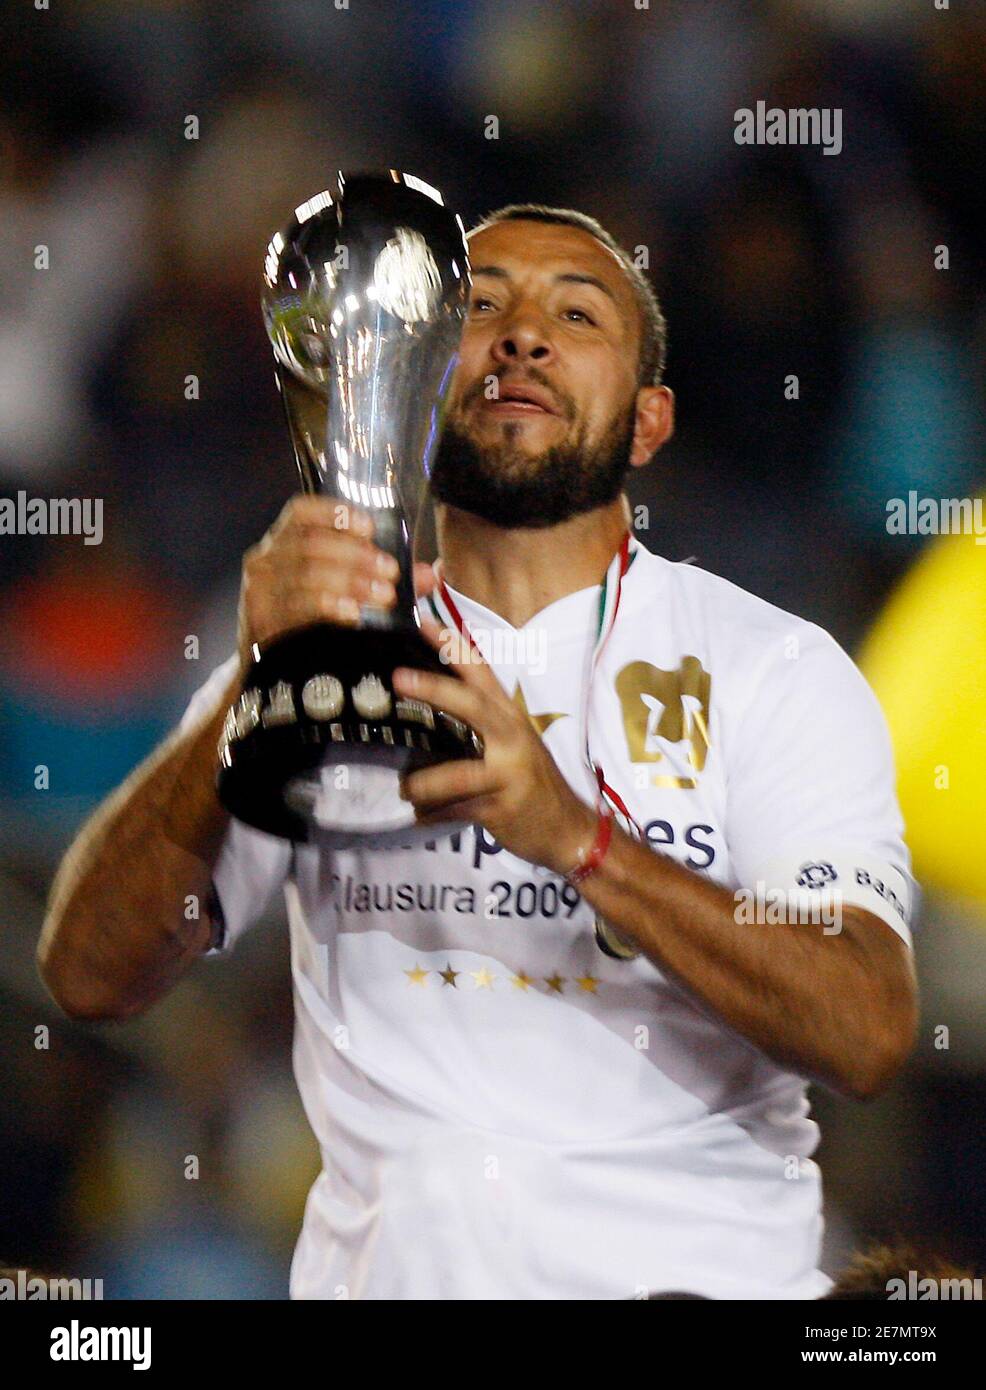 Pumas UNAM captain Sergio Bernal holds the trophy after winning the Mexican league championship soccer match final against Pachuca at Hidalgo stadium in Pachuca May 31, 2009. REUTERS/Eliana (MEXICO SPORT SOCCER